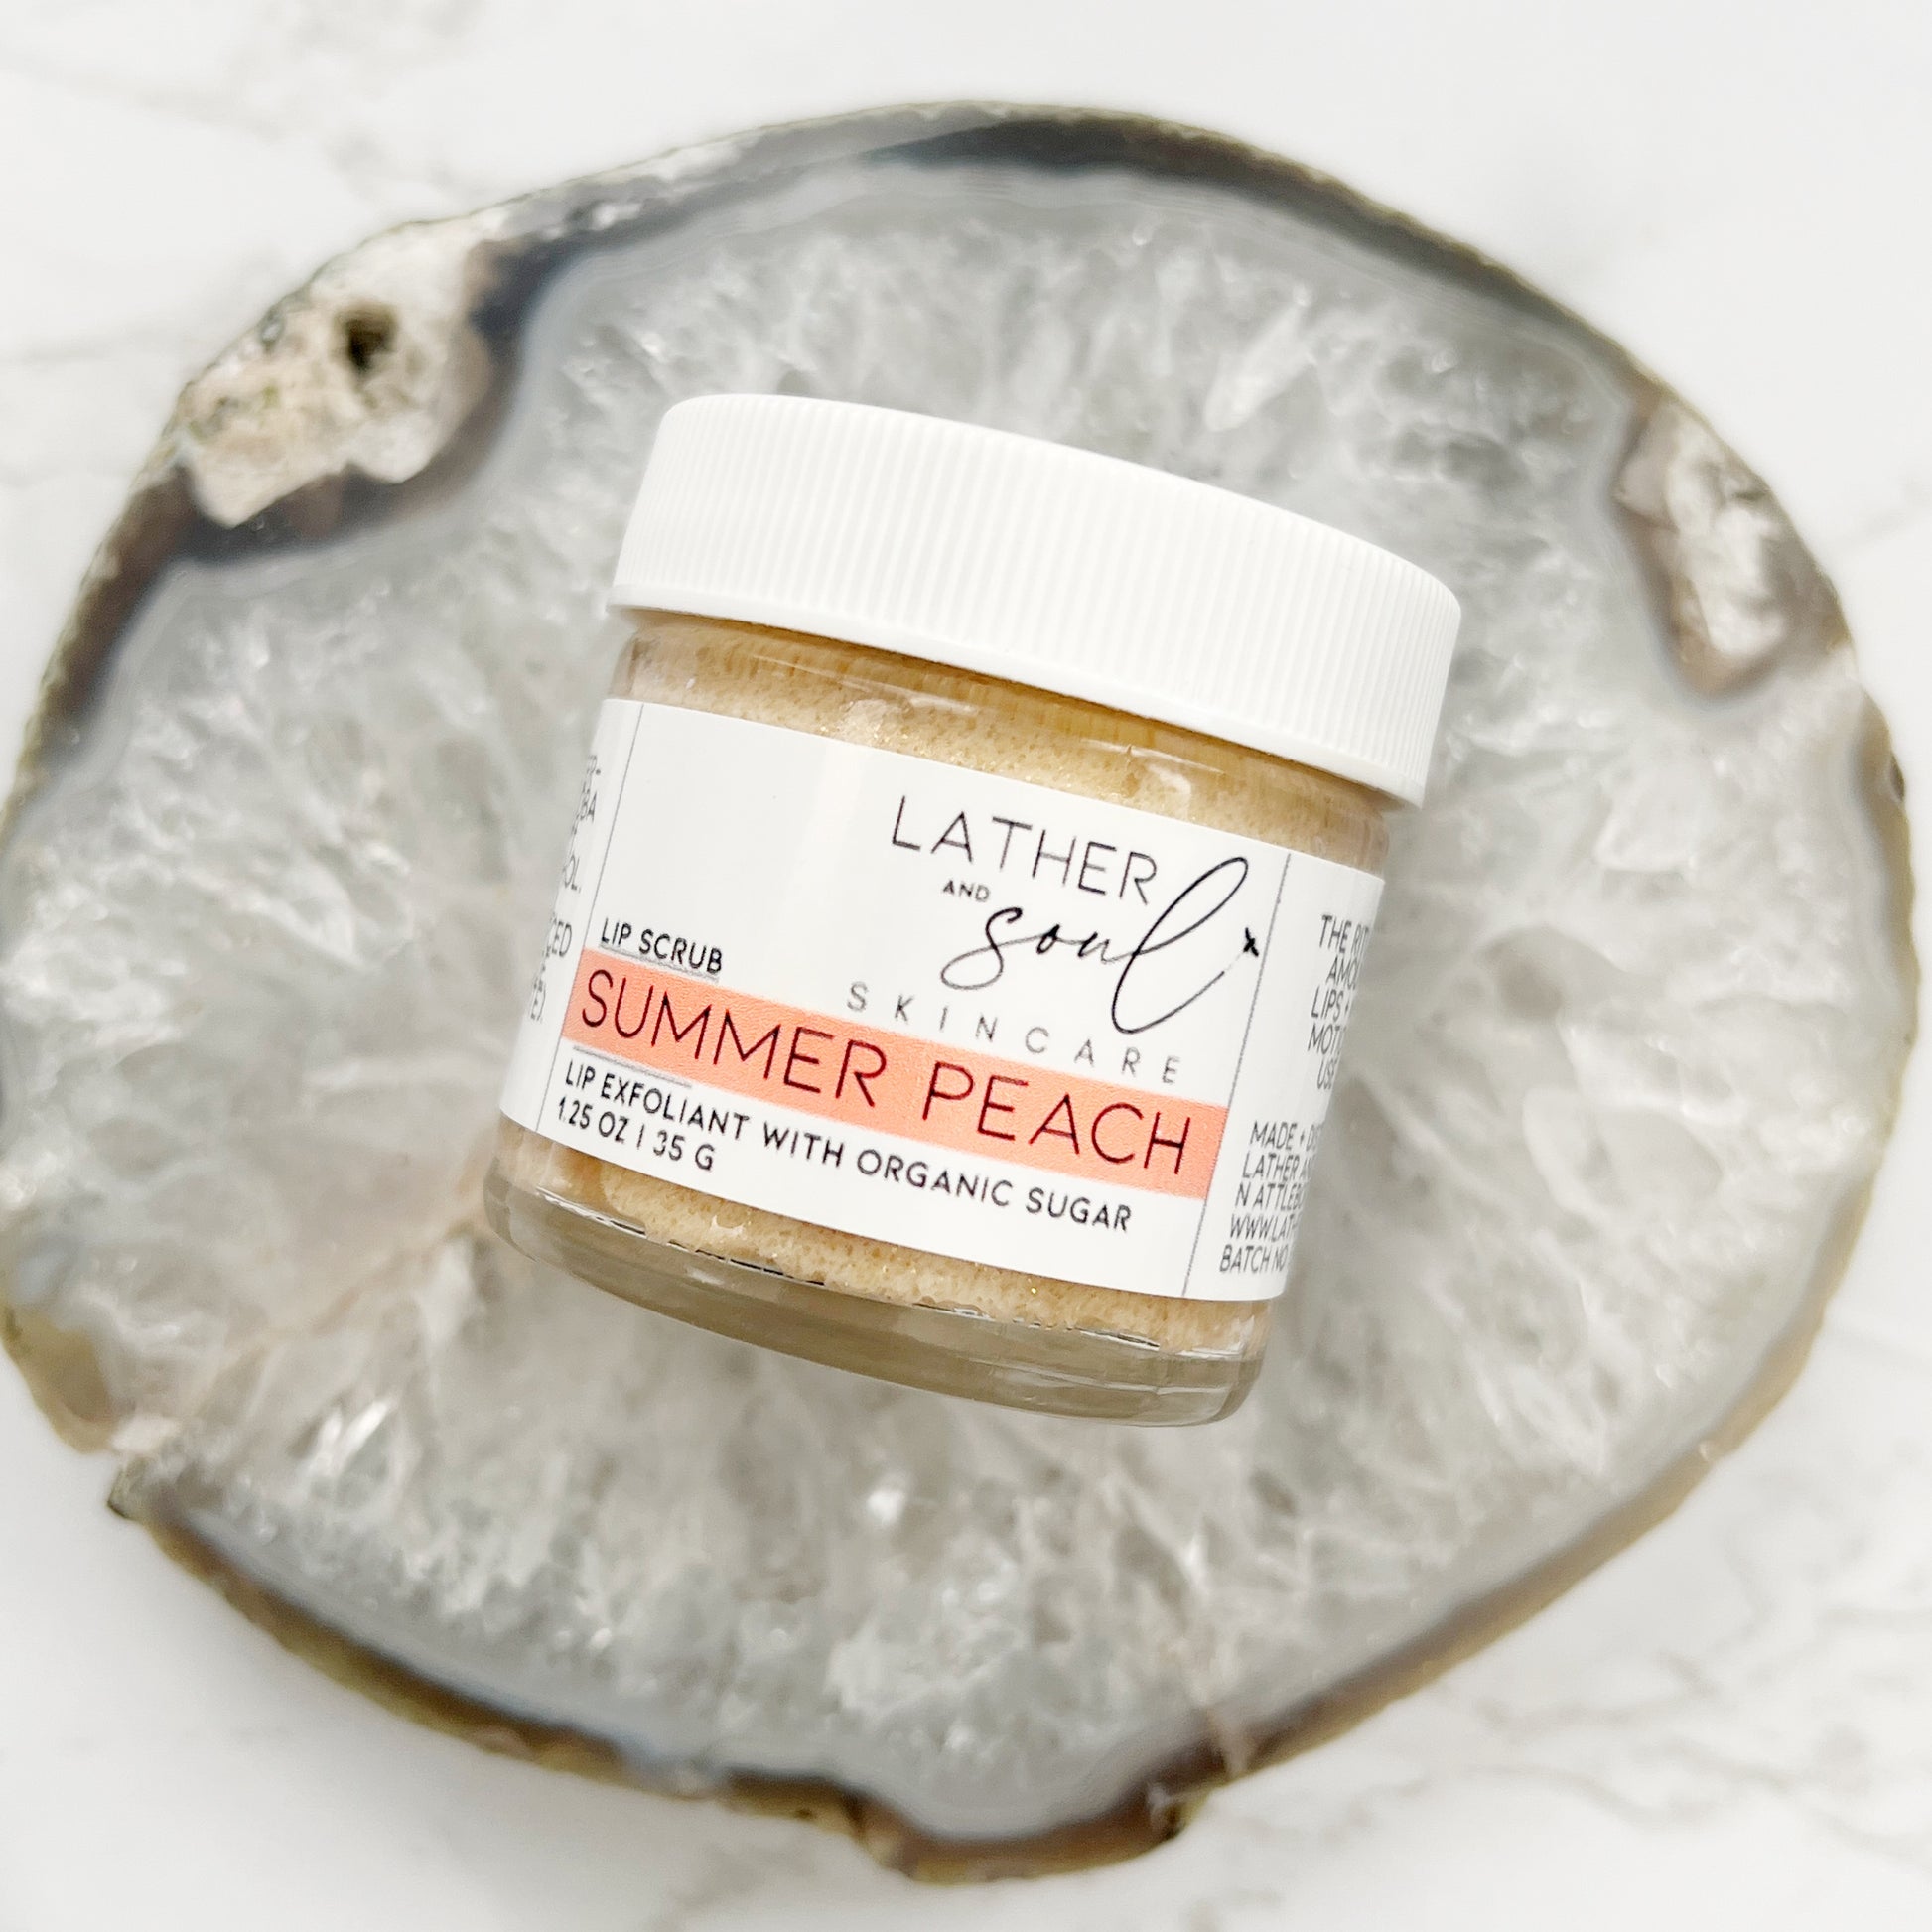 Summer Peach lip scrub for the most smooth and soft lips